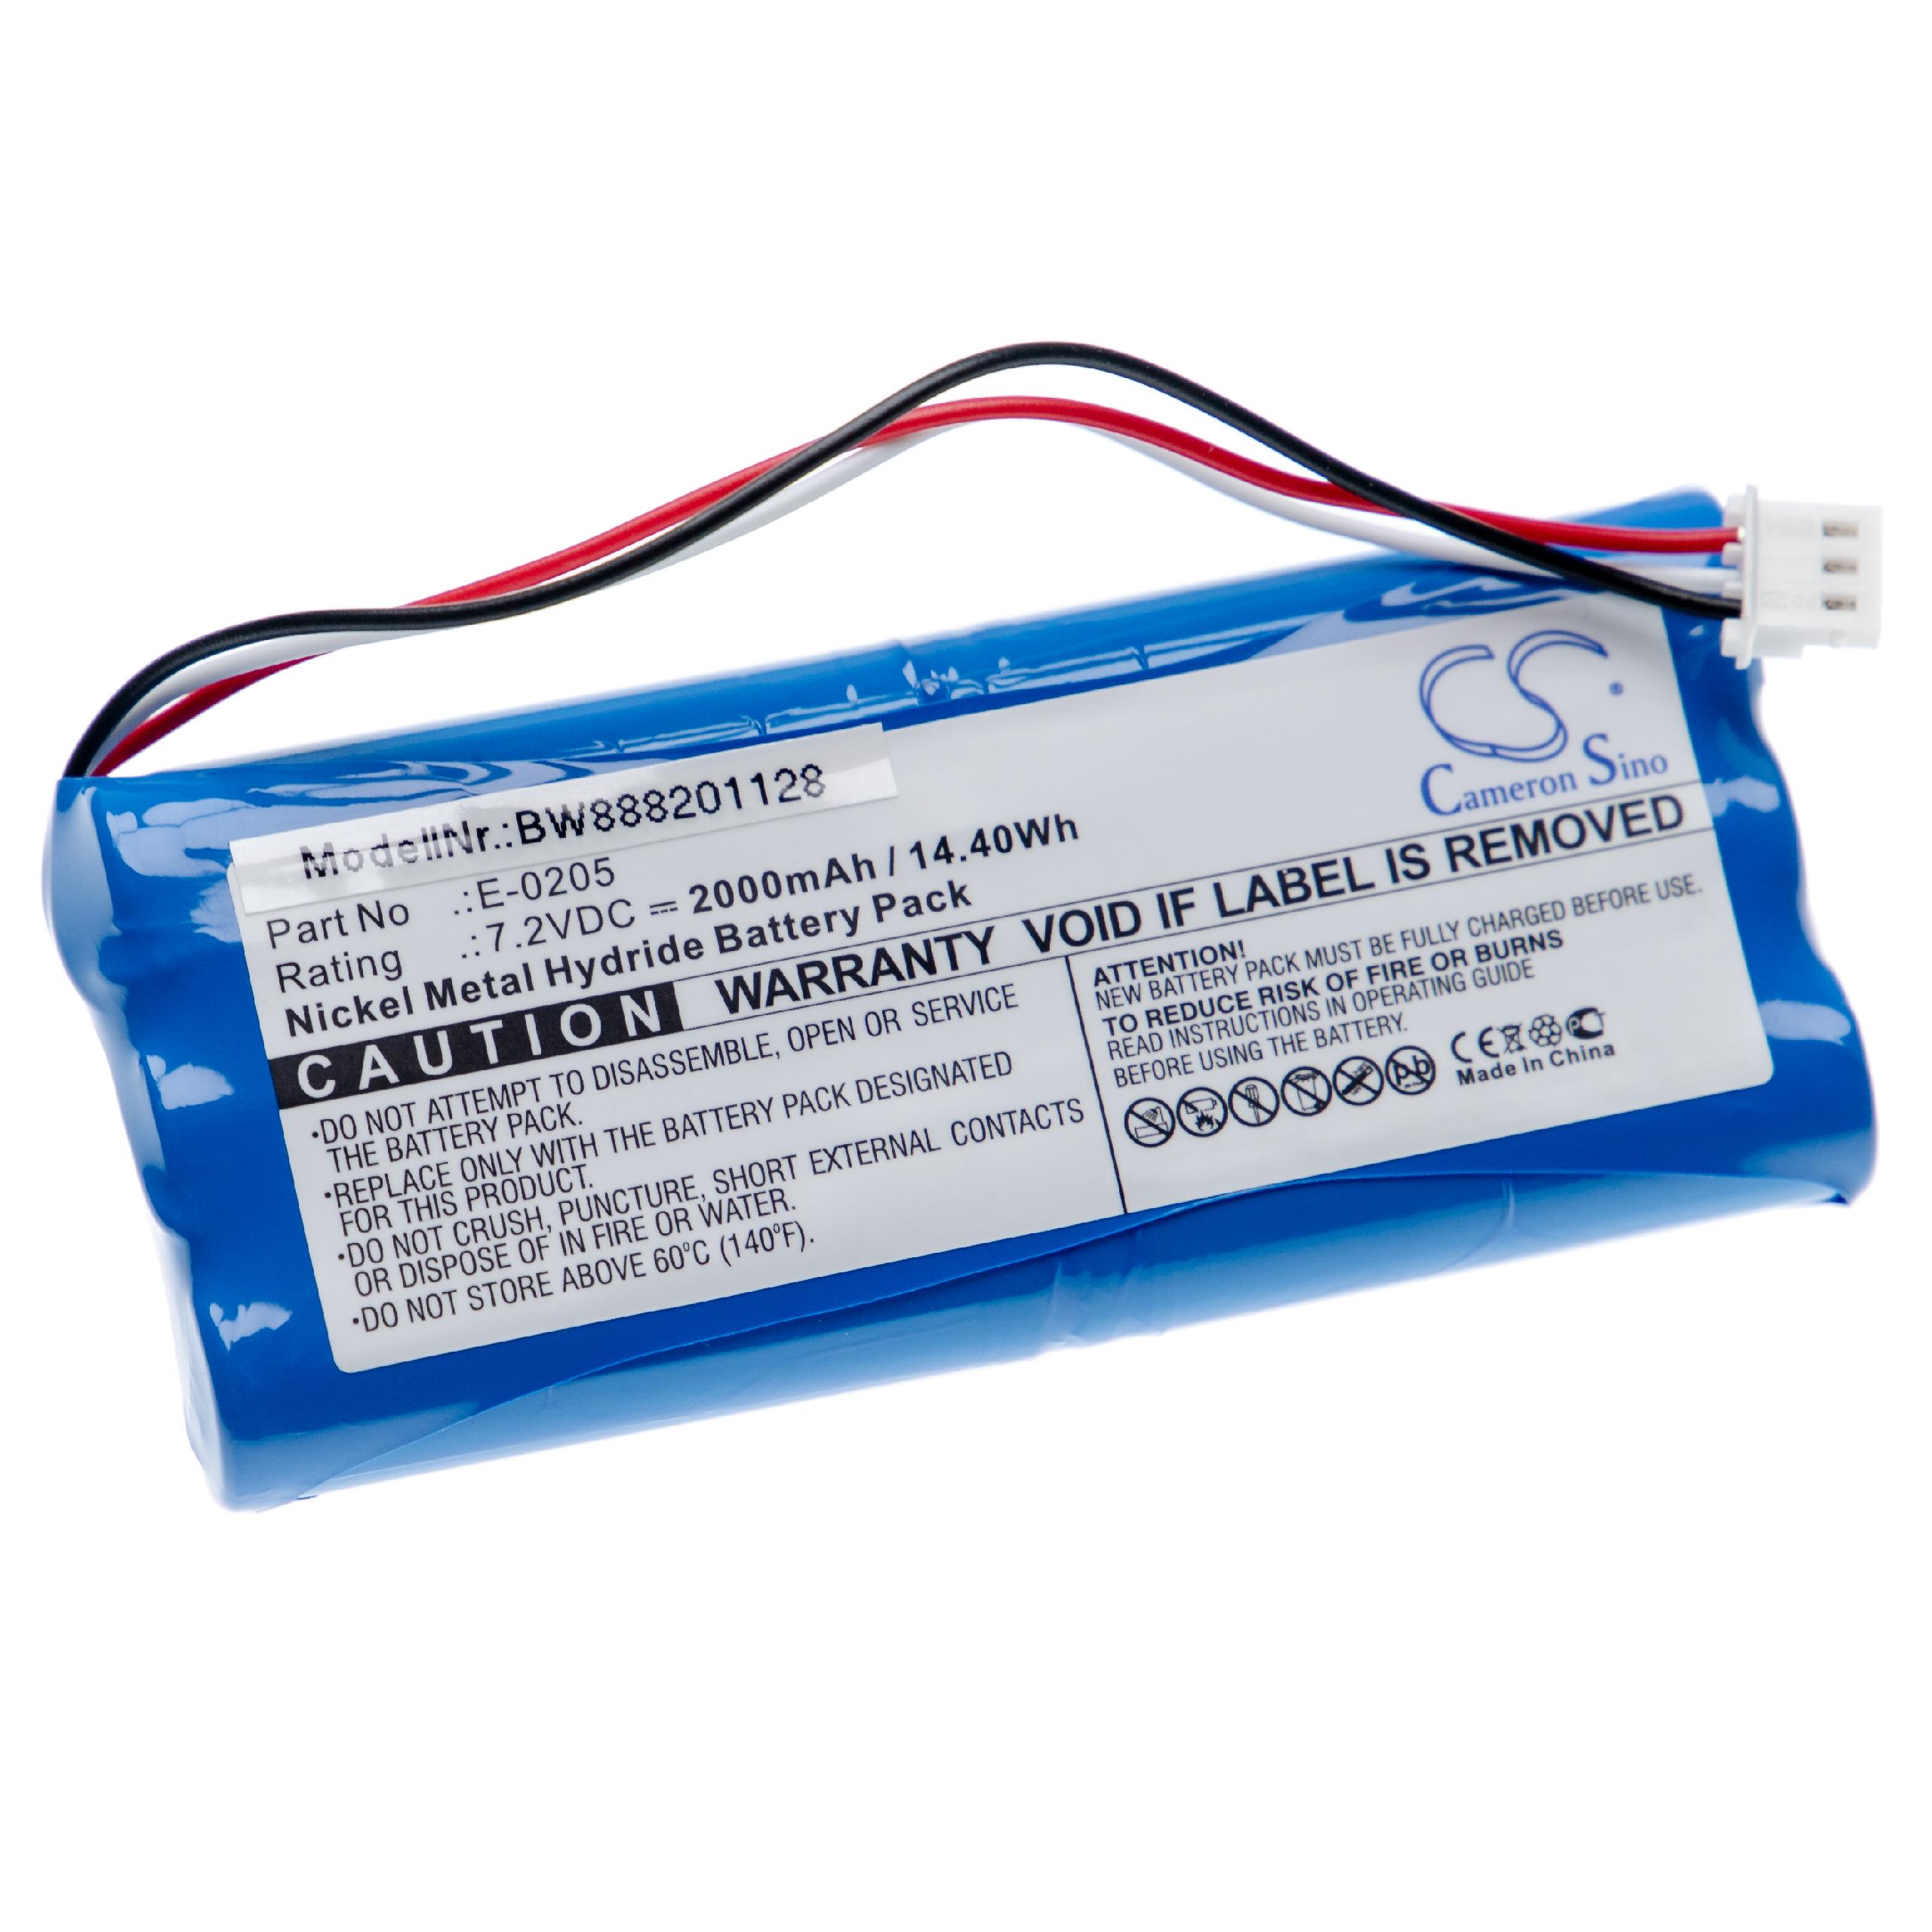 Laser Battery Replacement for Aaronia E-0205, ACE604396 2S1P - 2000mAh 7.2V NiMH